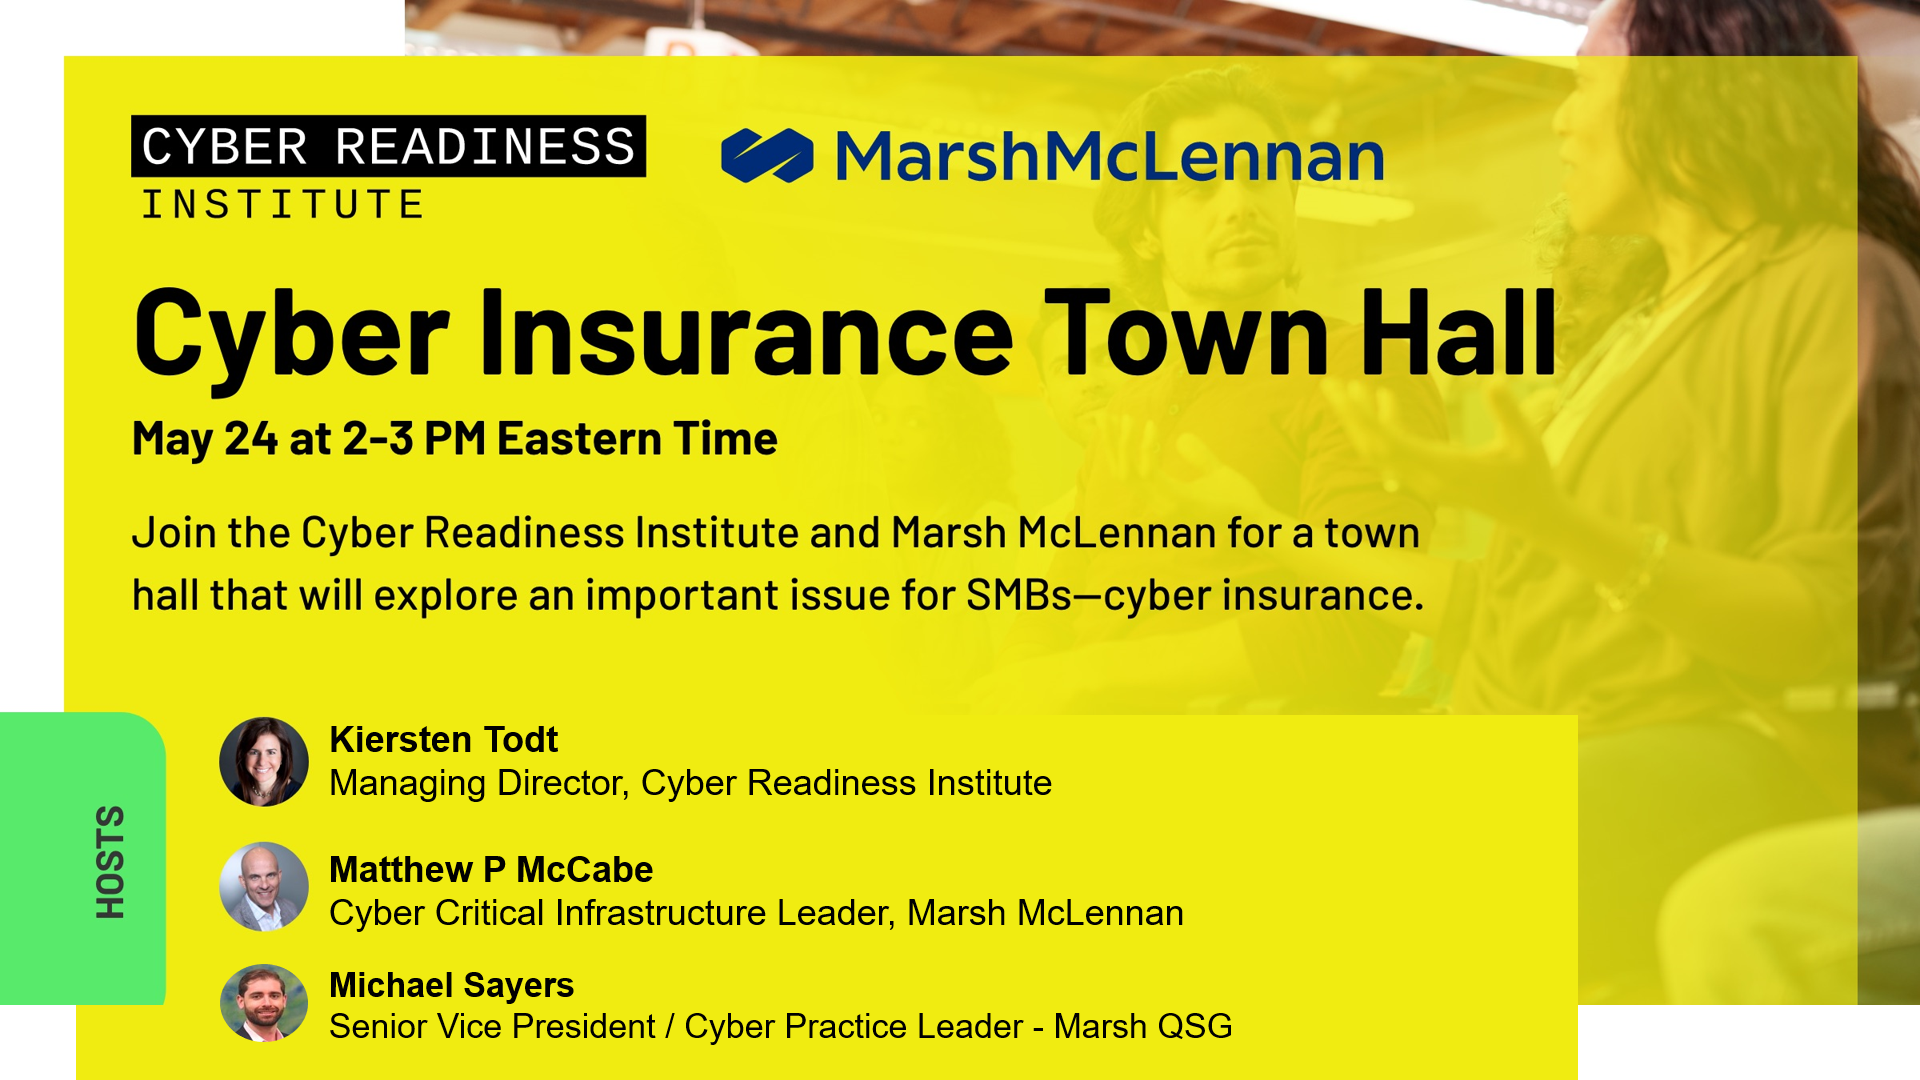 Cyber Insurance Town Hall event information with host logos